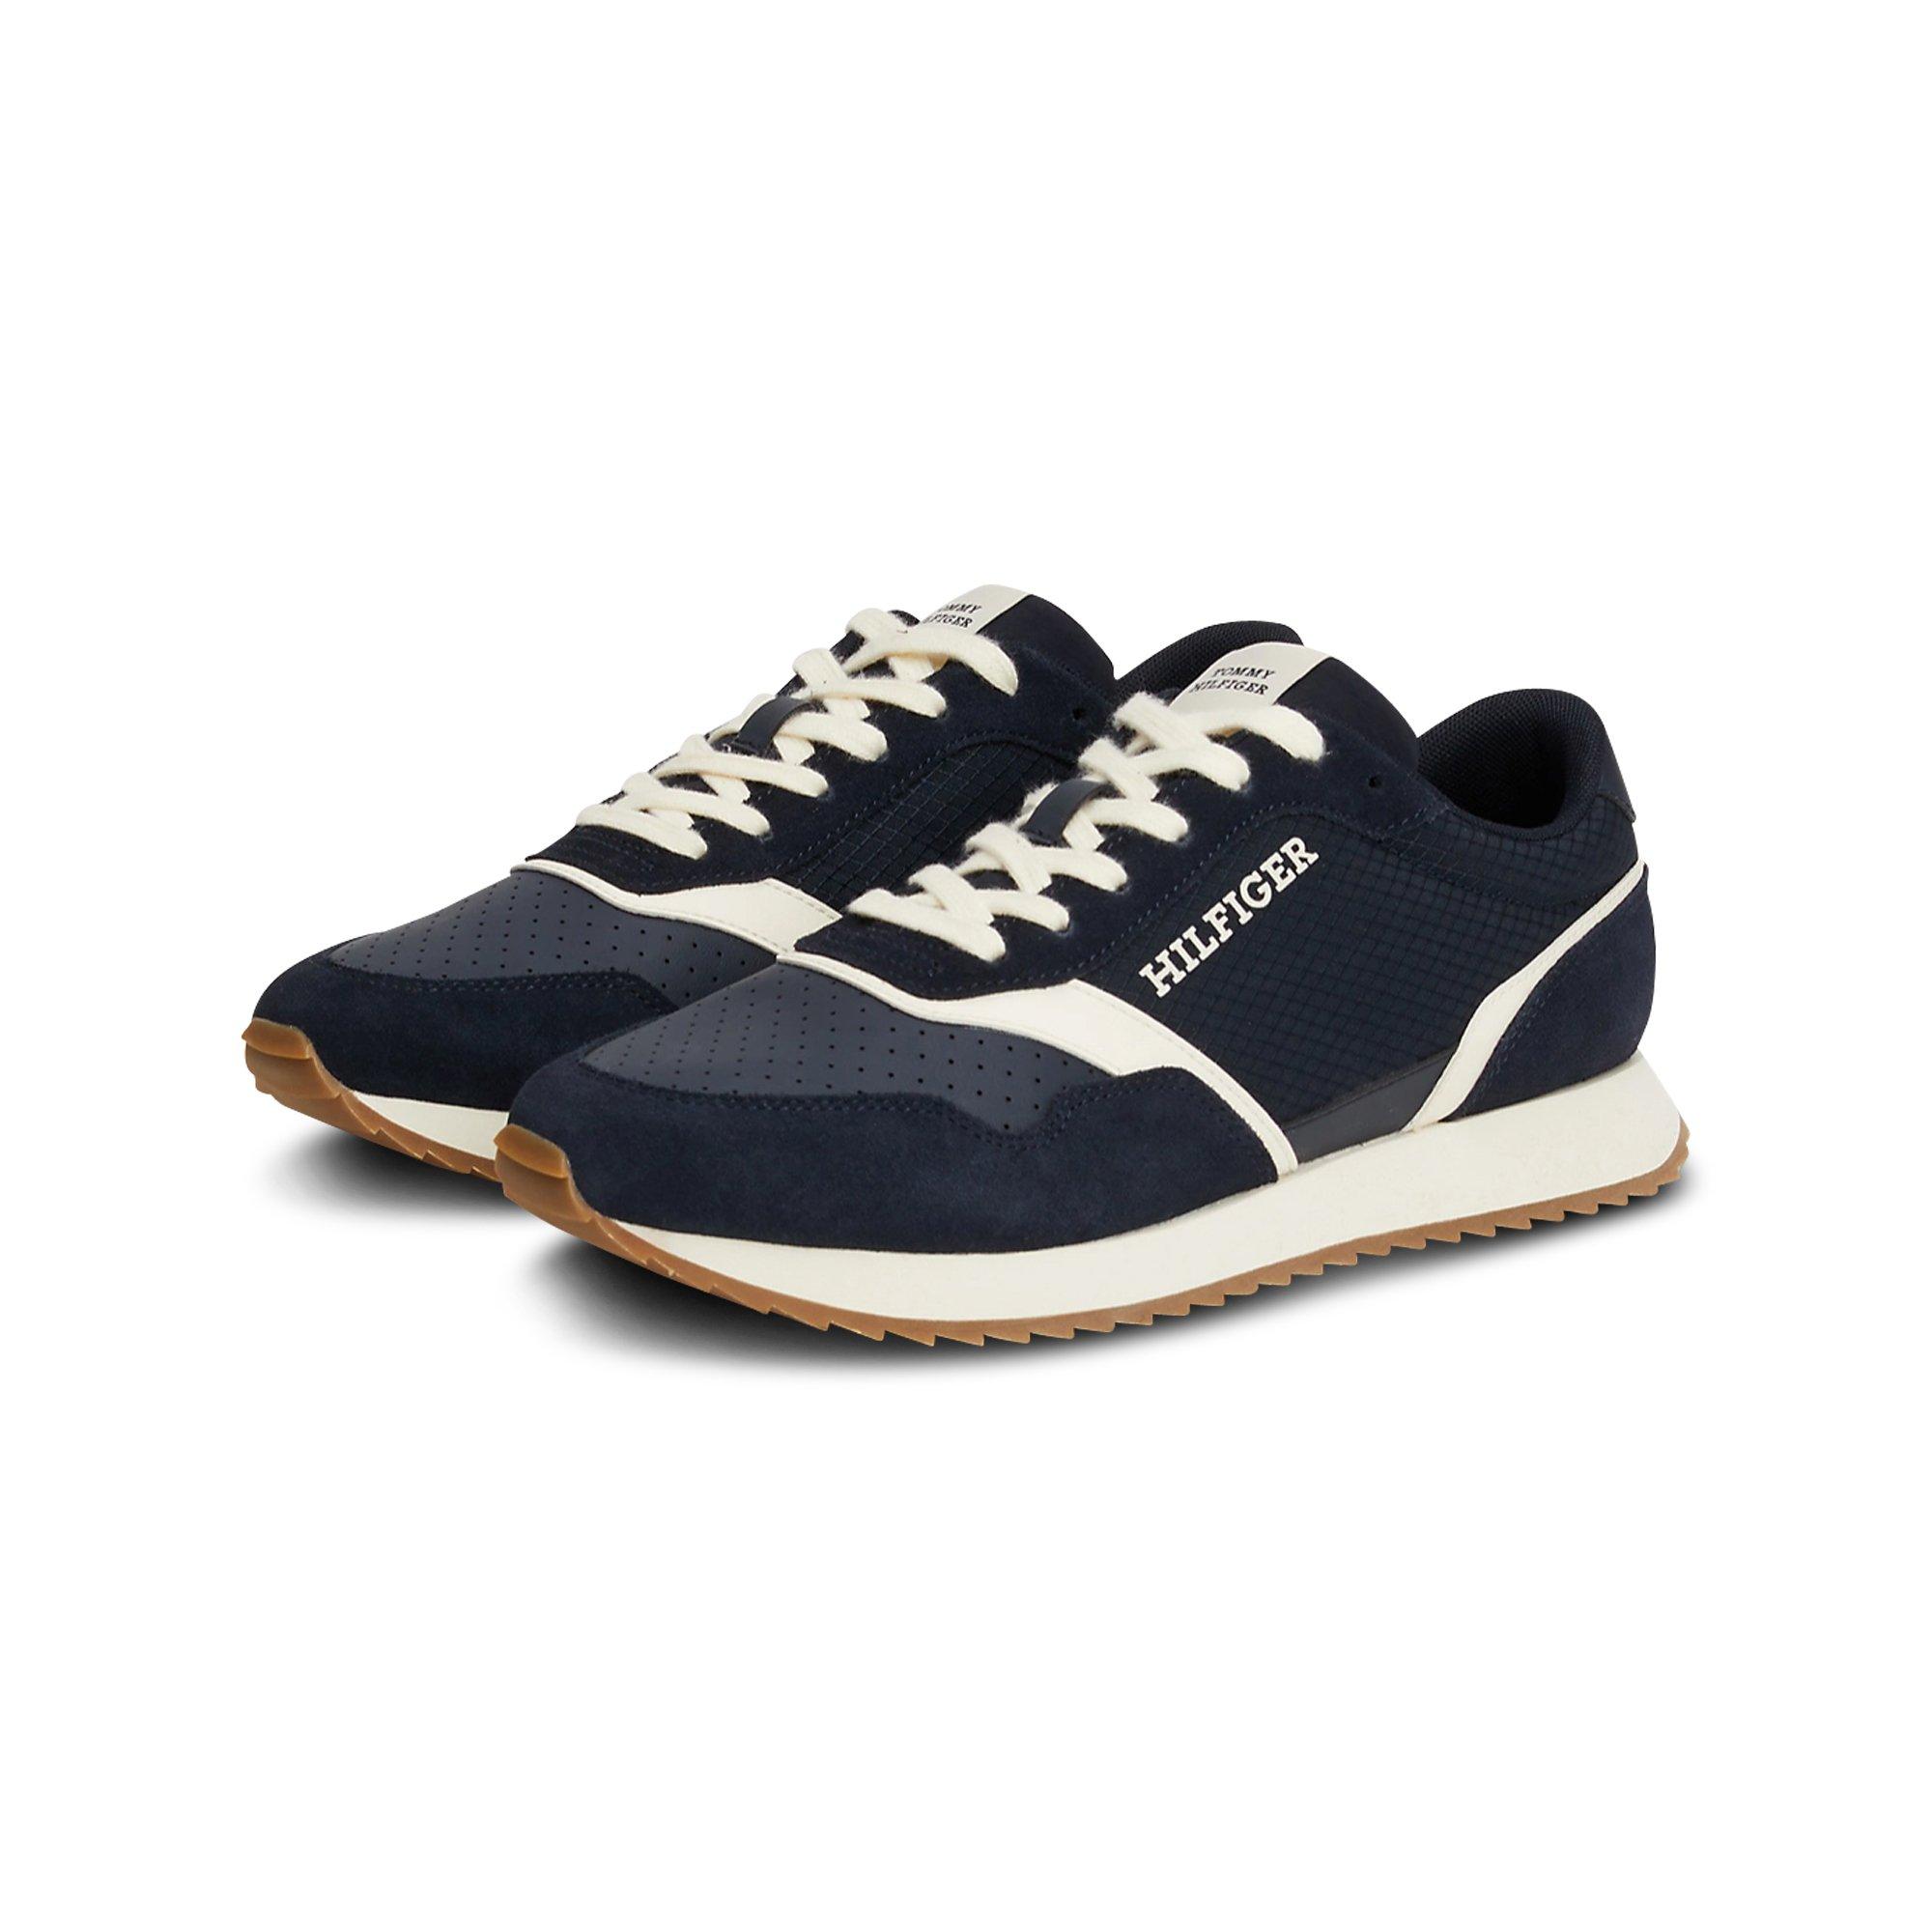 TOMMY HILFIGER RUNNER EVO COLORMA MIX Sneakers, basses 